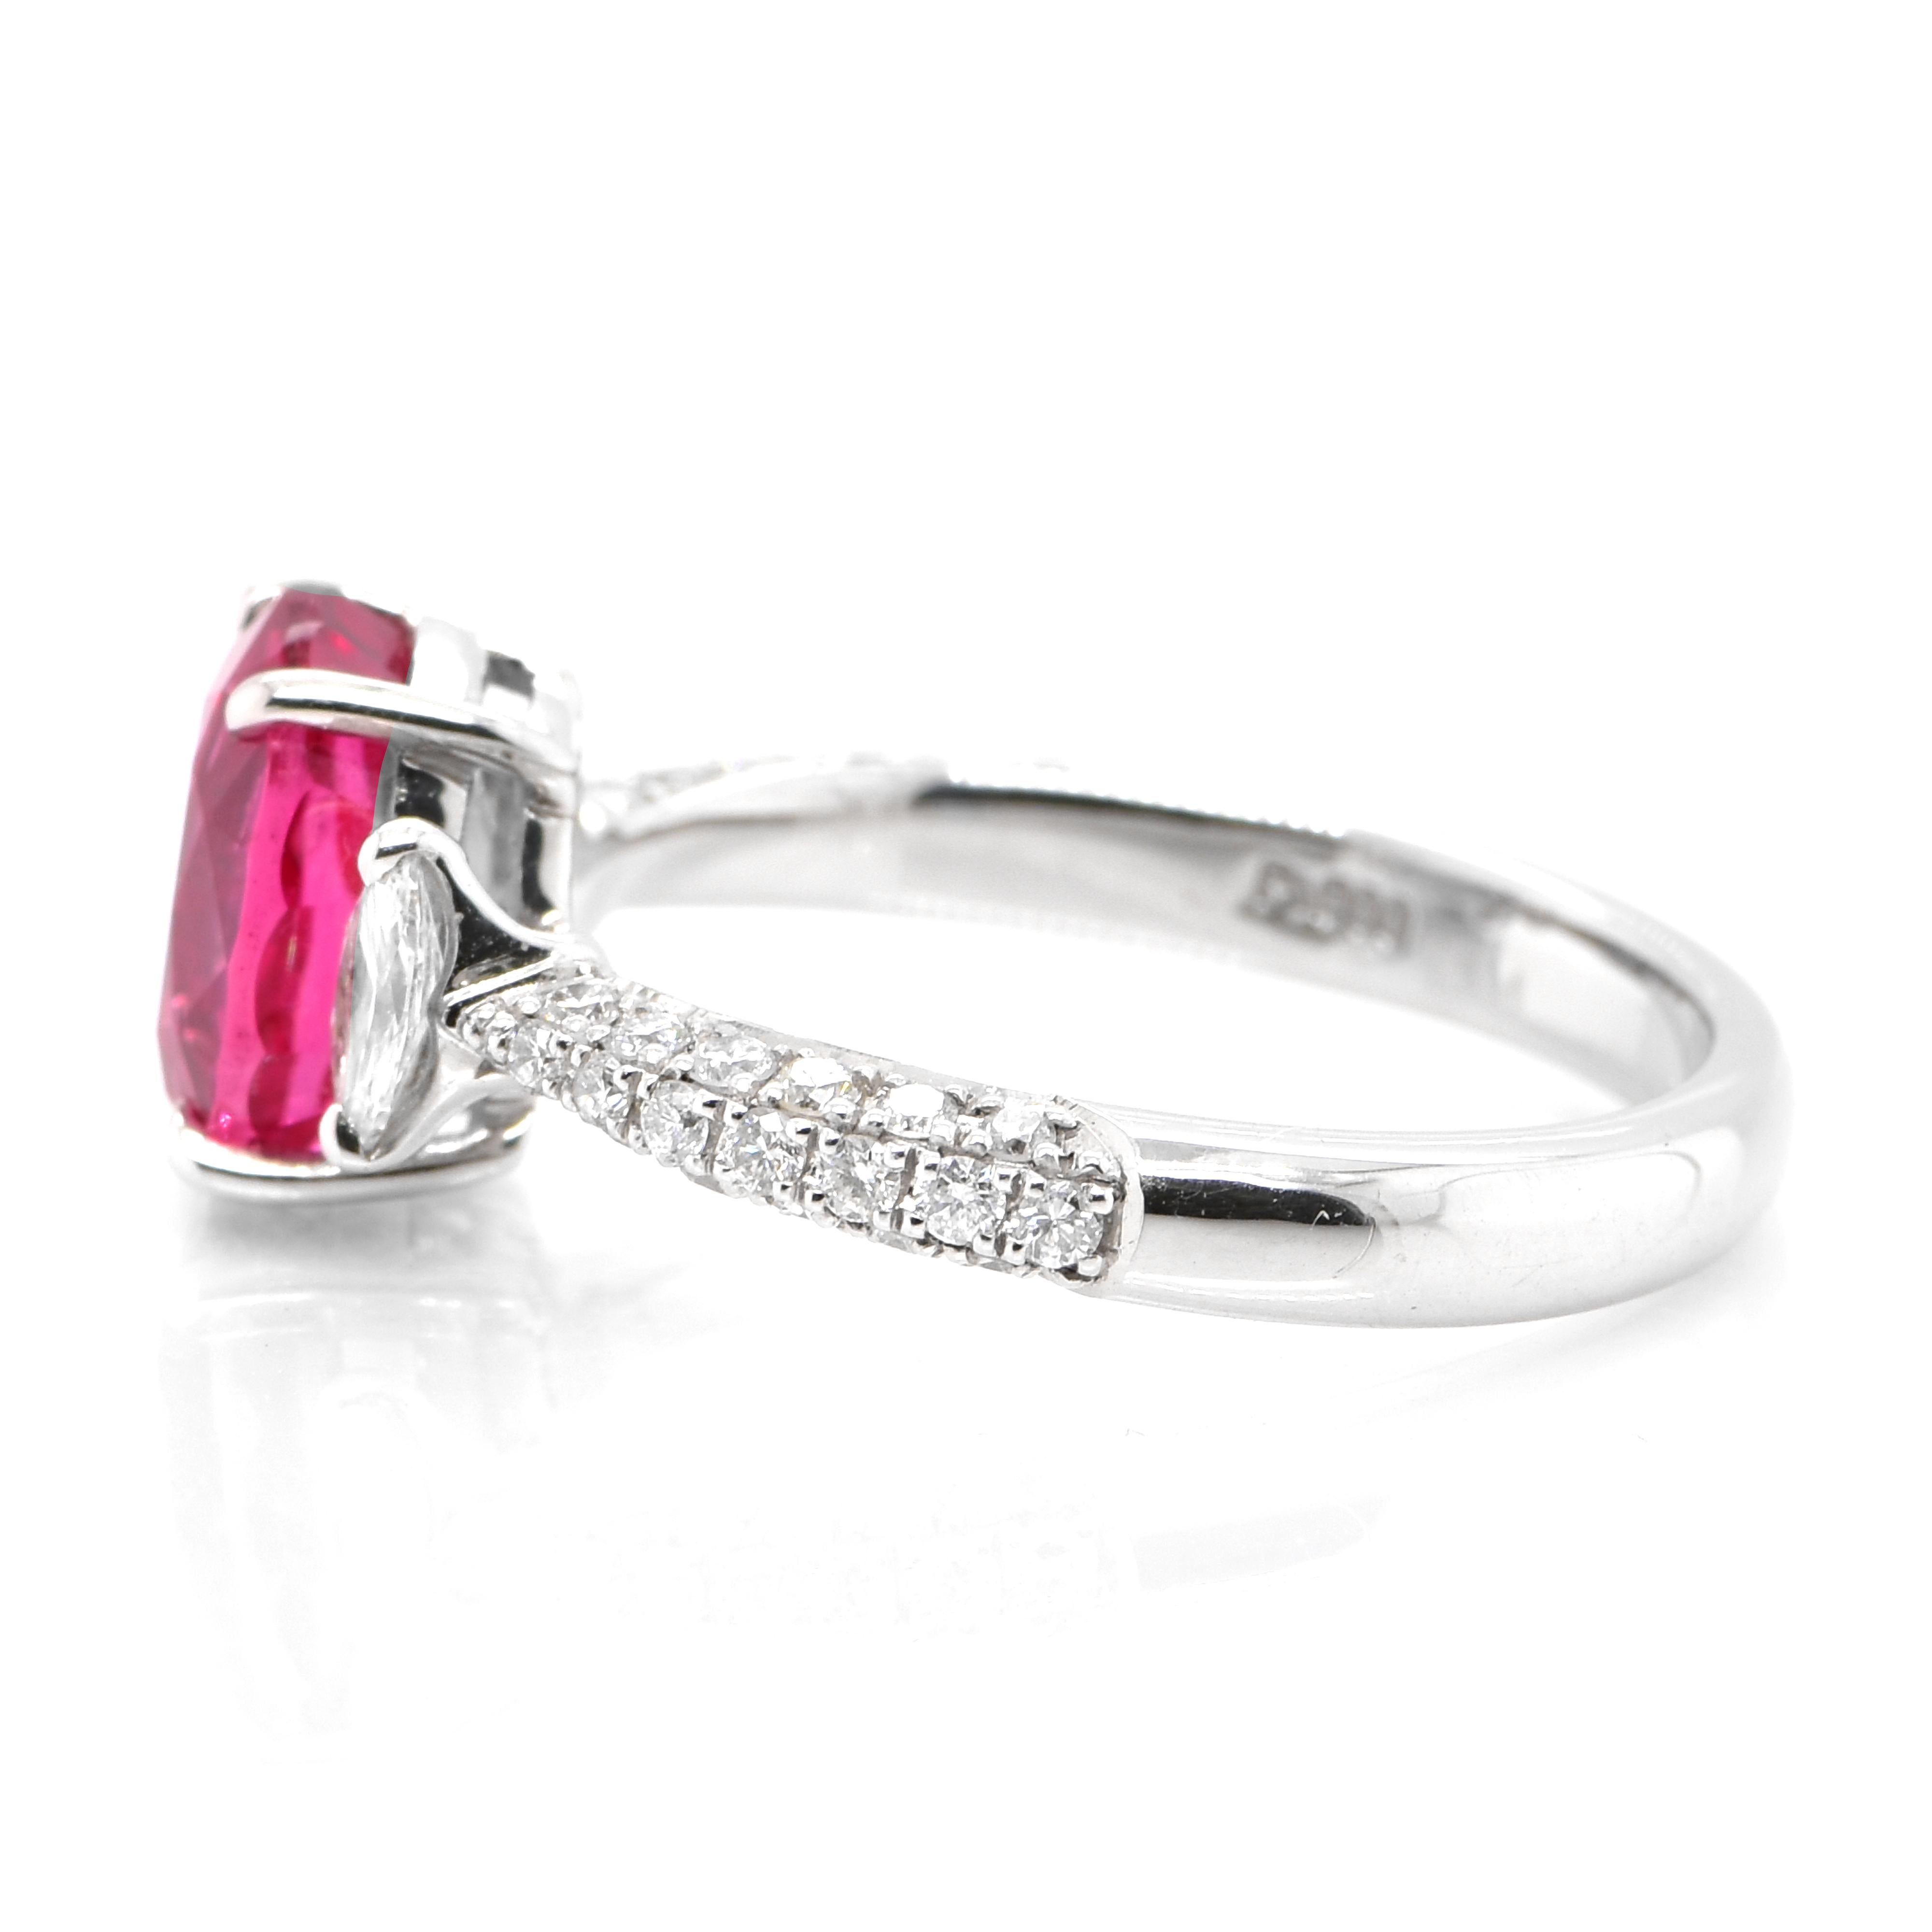 Oval Cut GIA Certified 3.17 Carat Siam Ruby and Diamond Cocktail Ring Made in Platinum For Sale